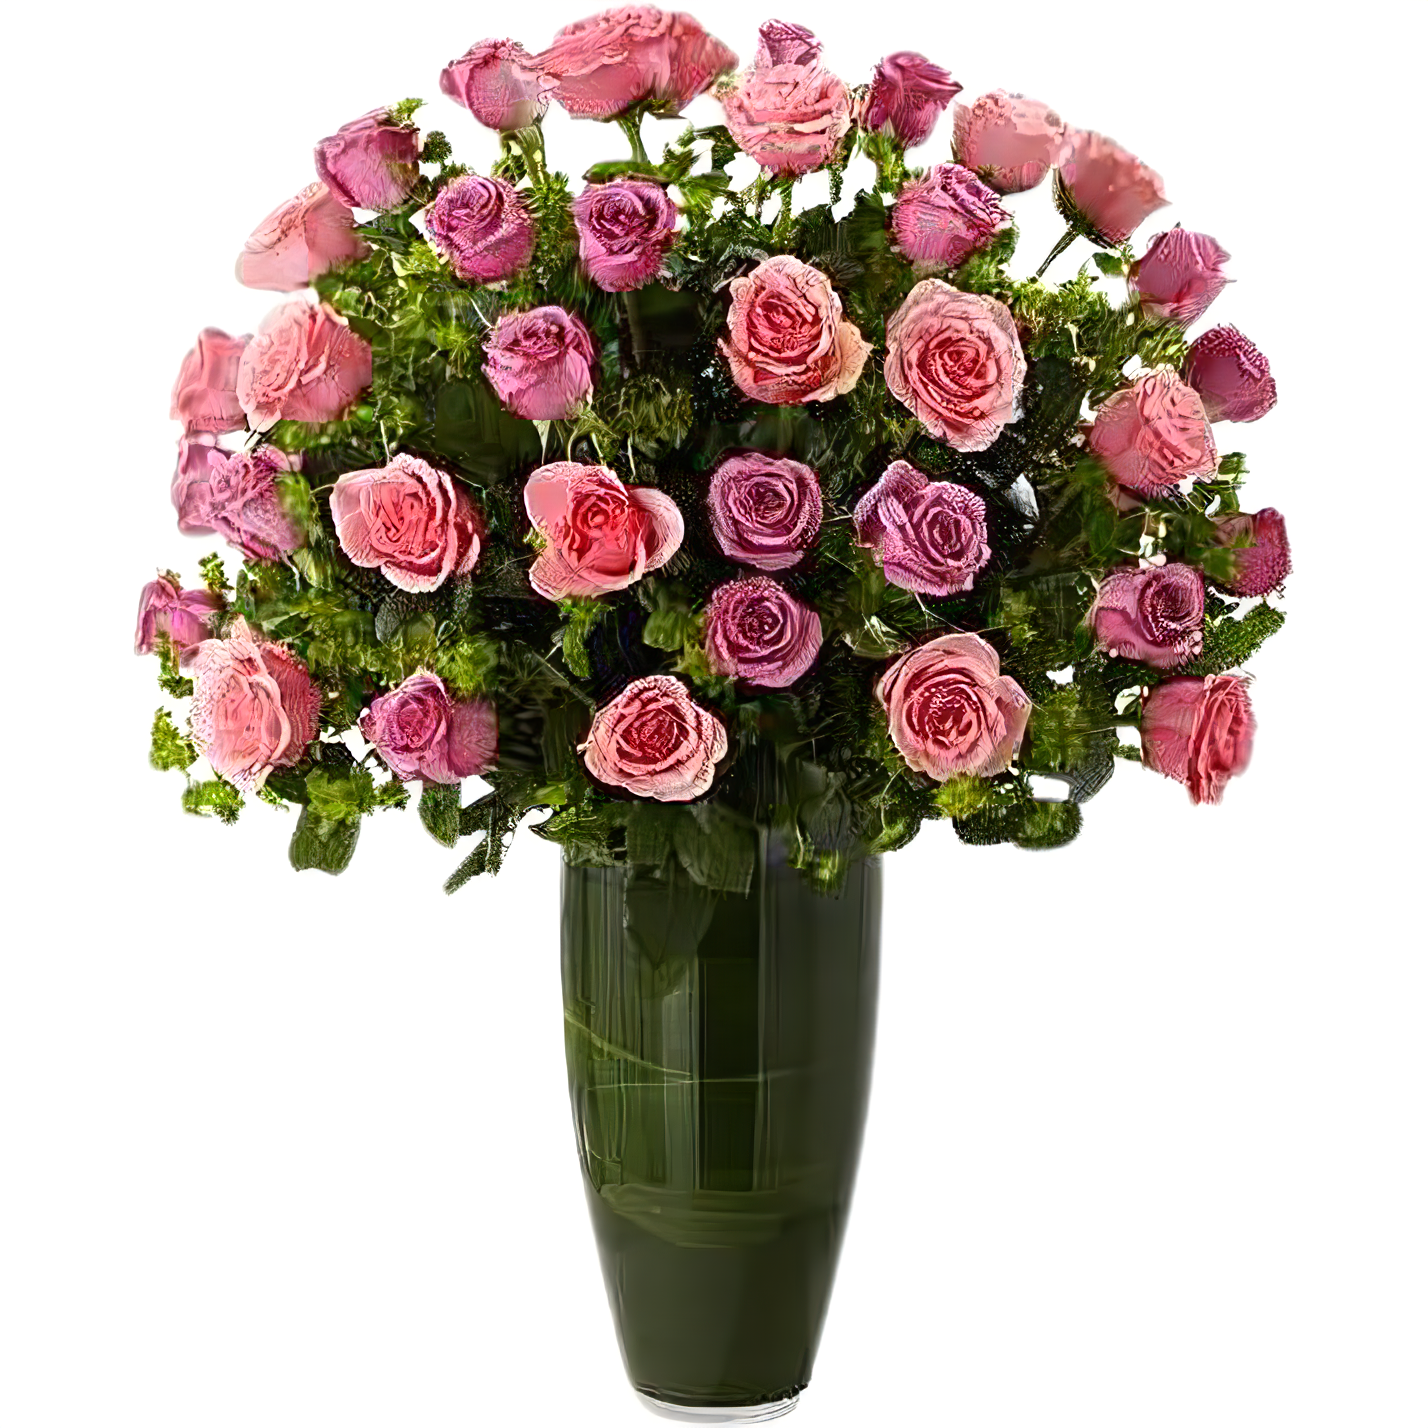 NYC Flower Delivery - Luxury Rose Bouquet - 24 Premium Pink & Lavender Long Stem Roses - Products > Luxury Collection